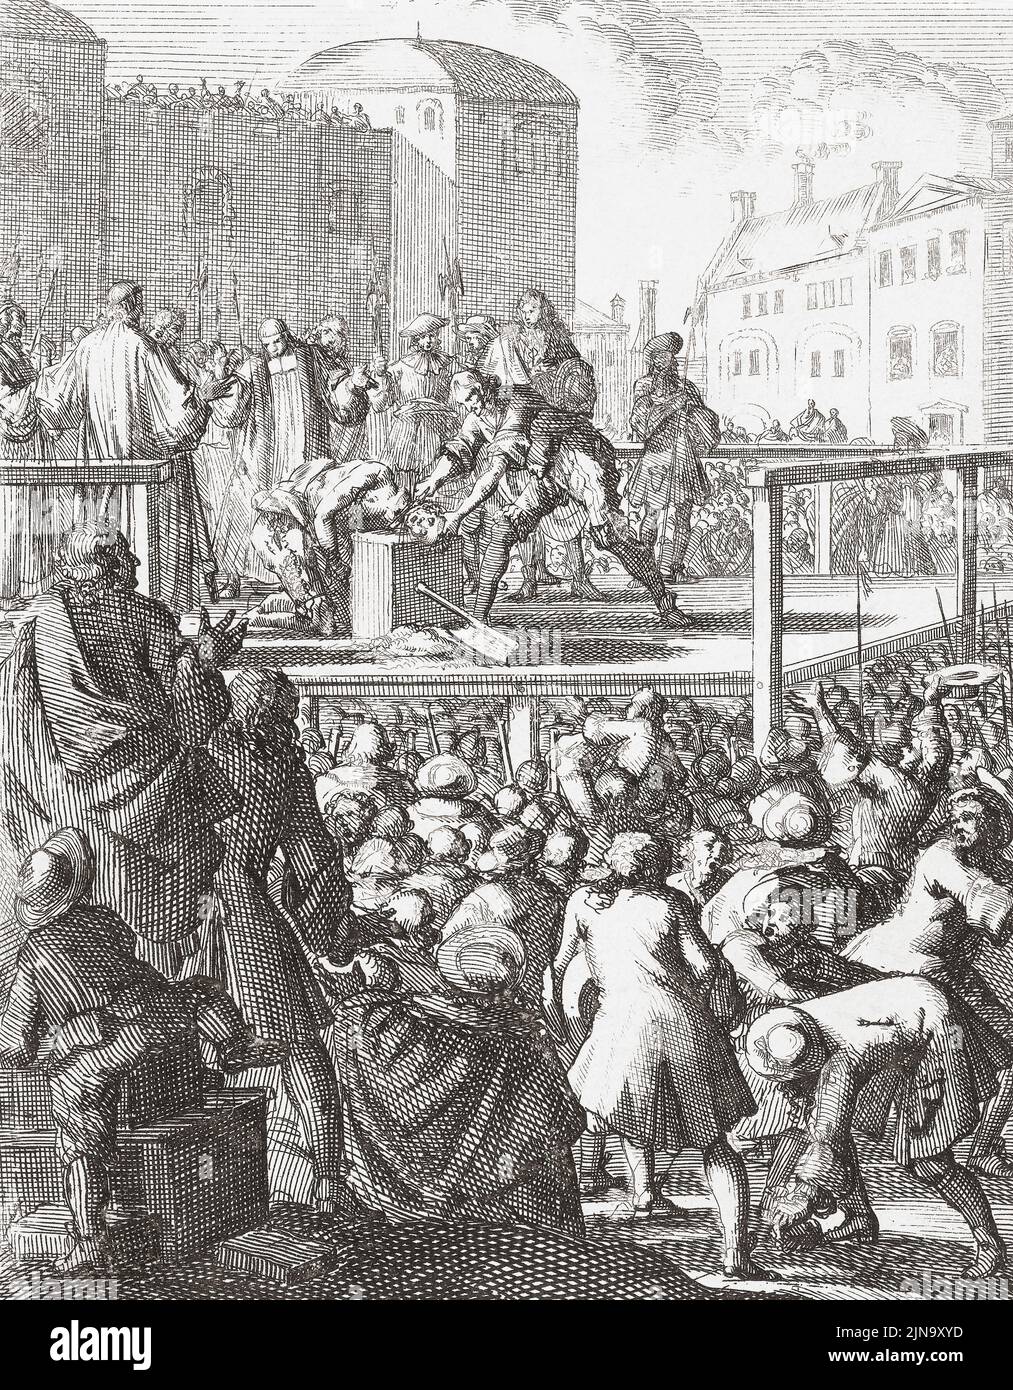 The execution of James Scott, 1st Duke of Monmouth, 1st Duke of Buccleuch, 1649 - 1685.  Monmouth, an illigitimate son of King Charles II was executed for treason on Tower Hill on July 15, 1685 after the failure of what has become known as the Monmouth Rebellion, also known as the Pitchfork Rebellion or the West Country Rebellion.  His beheading was famously botched, by the executioner Jack Ketch who took as many as five blows of the axe and a final cut with a knife to sever his head.  After a 17th century work by Jan Luyken. Stock Photo